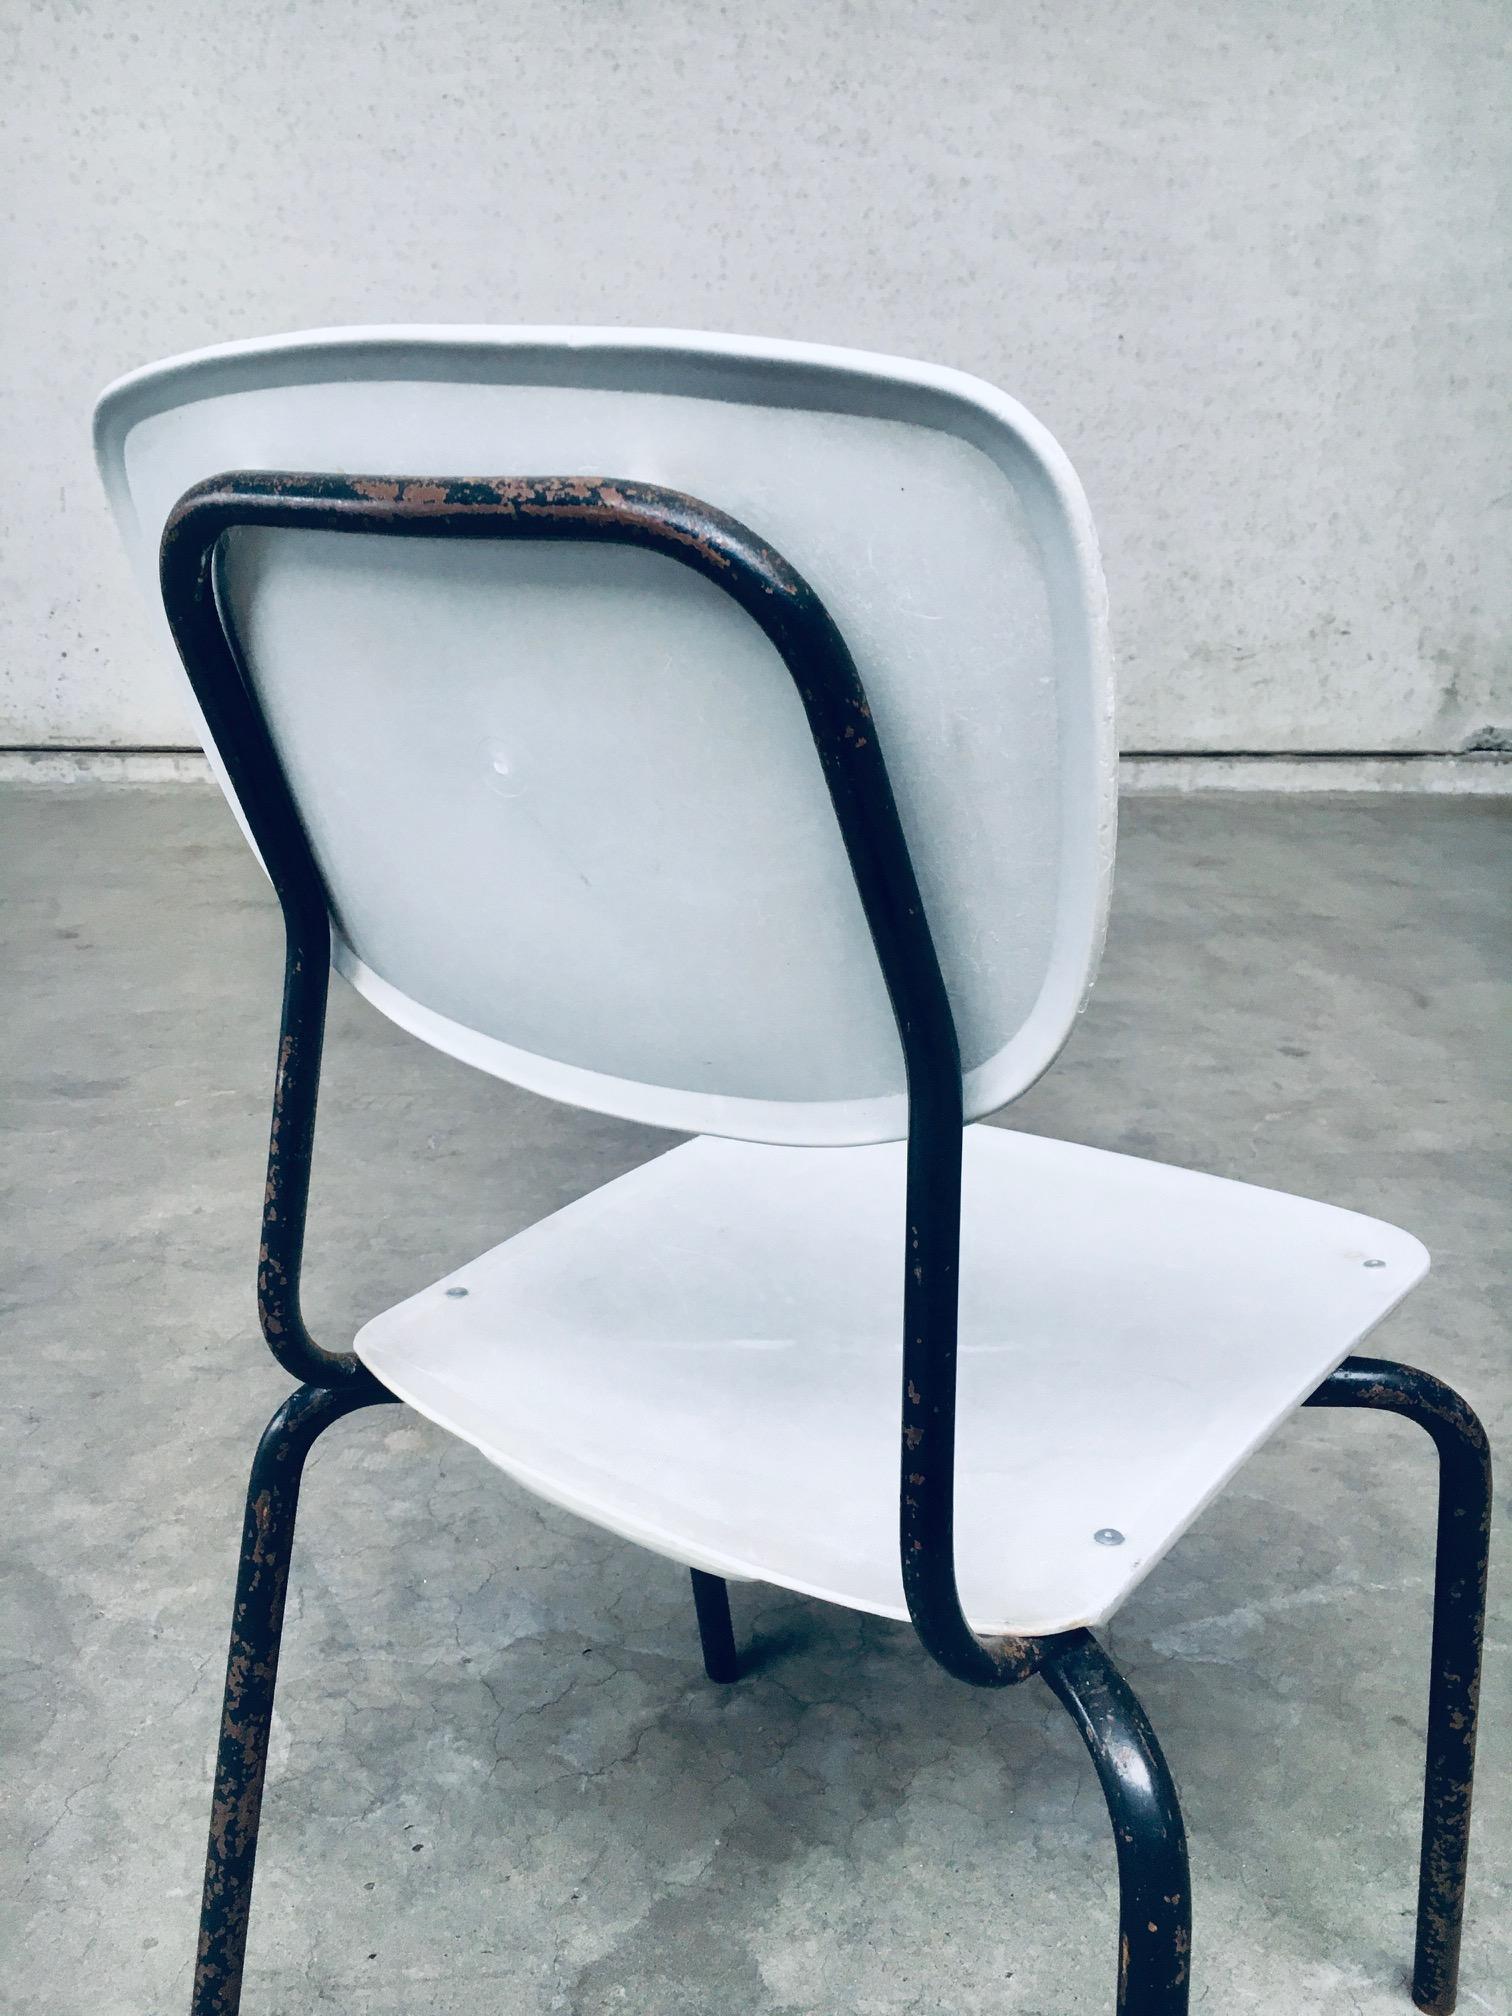 1960's Dutch Industrial Design Stacking Chairs For Sale 13